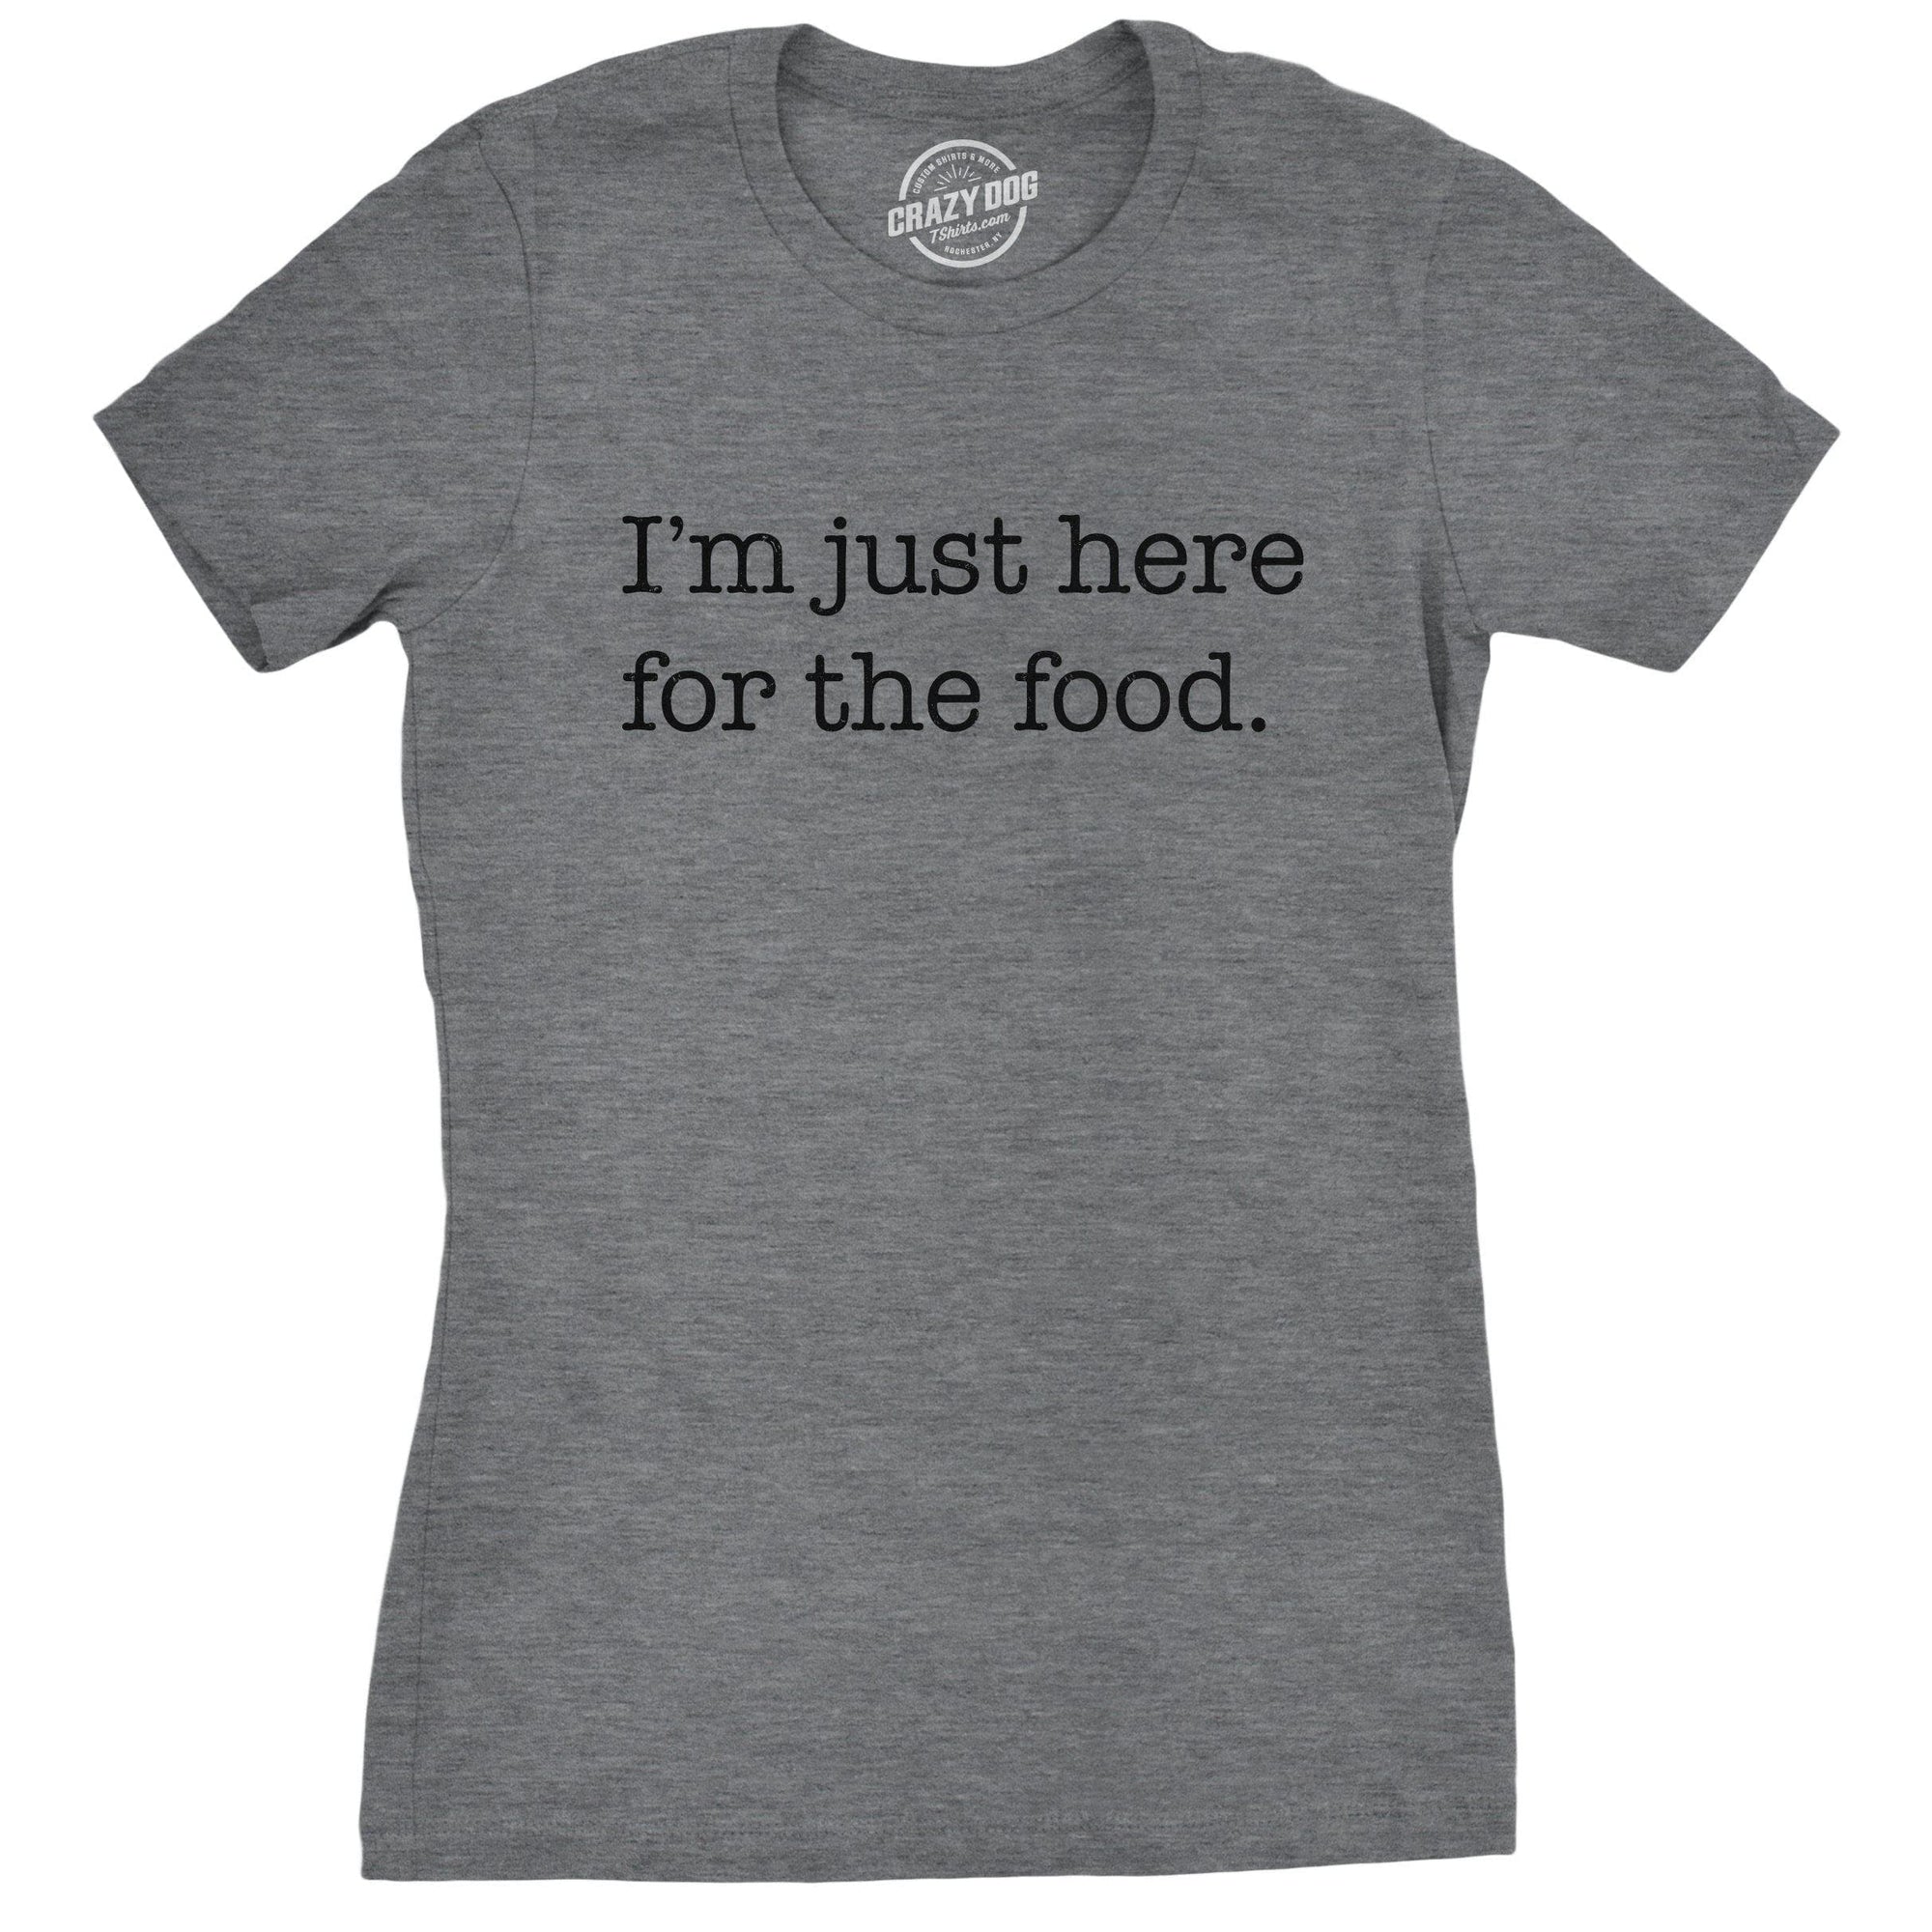 I'm Just Here For The Food Women's Tshirt  -  Crazy Dog T-Shirts